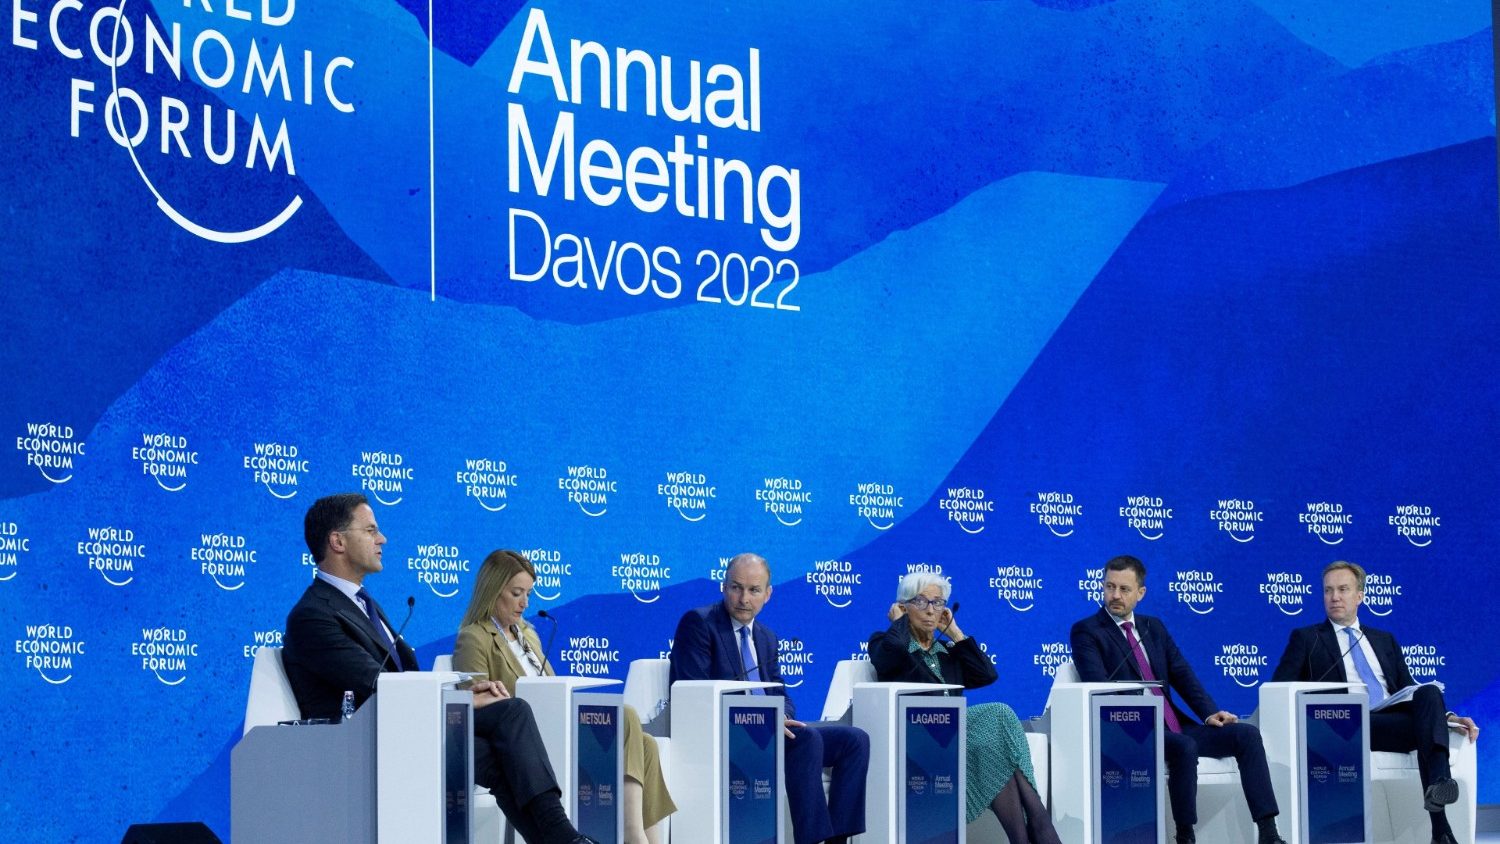 Davos: Church already dedicated to themes of Forum - Vatican News